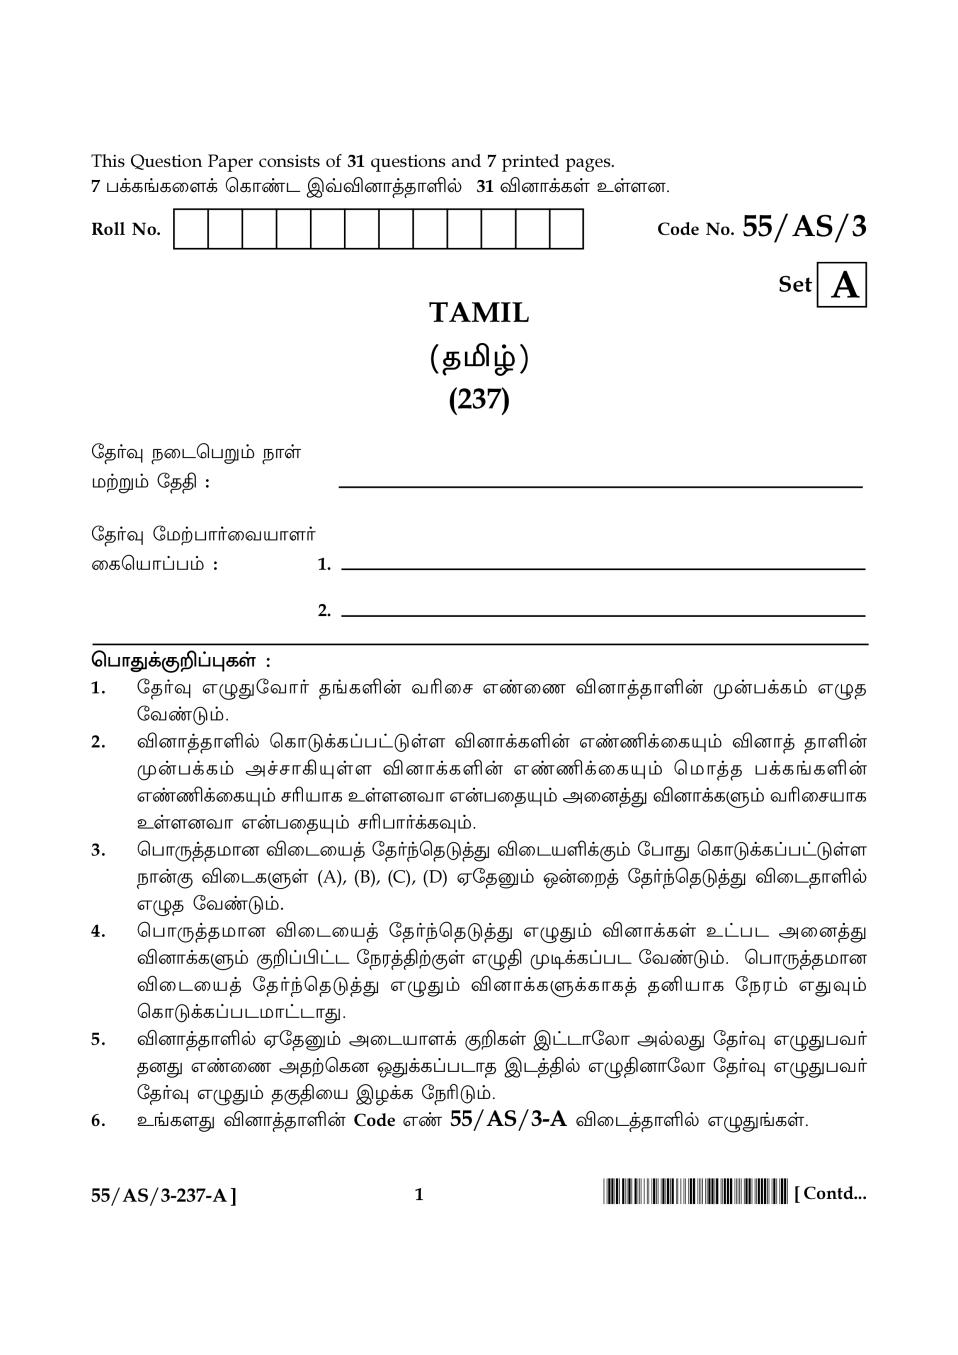 NIOS Class 10 Question Paper Oct 2017 - Tamil - Page 1